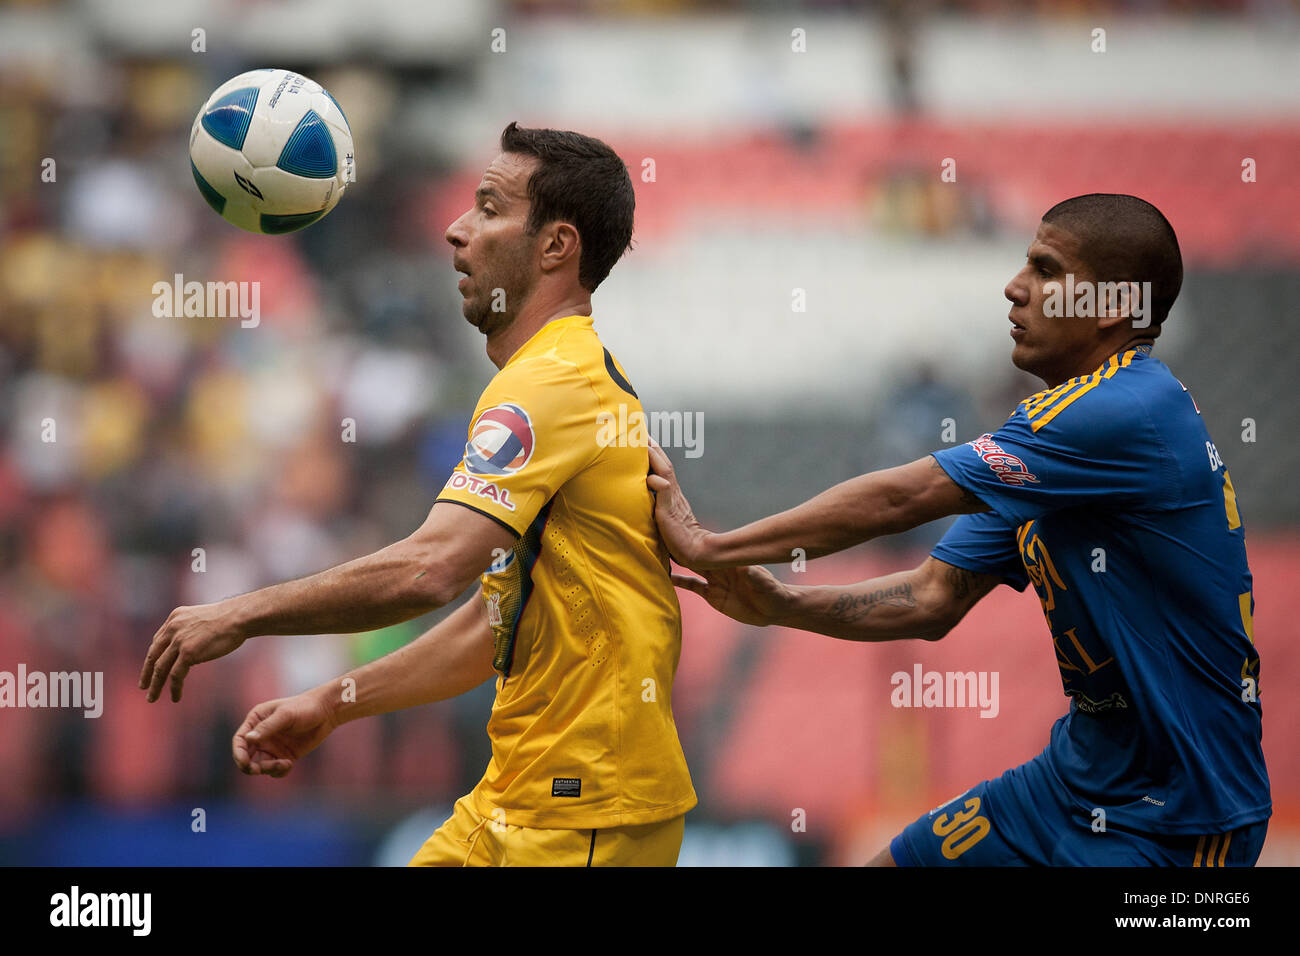 Mexico City, Mexico. 4th Jan, 2014. Luis Gabriel Rey (L) of America vies for the ball with Carlos Salcido of Tigres during their match of the MX League Closing Tournament 2014, held in the Azteca Stadium, in Mexico City, capital of Mexico, on Jan. 4, 2014. Credit:  Pedro Mera/Xinhua/Alamy Live News Stock Photo